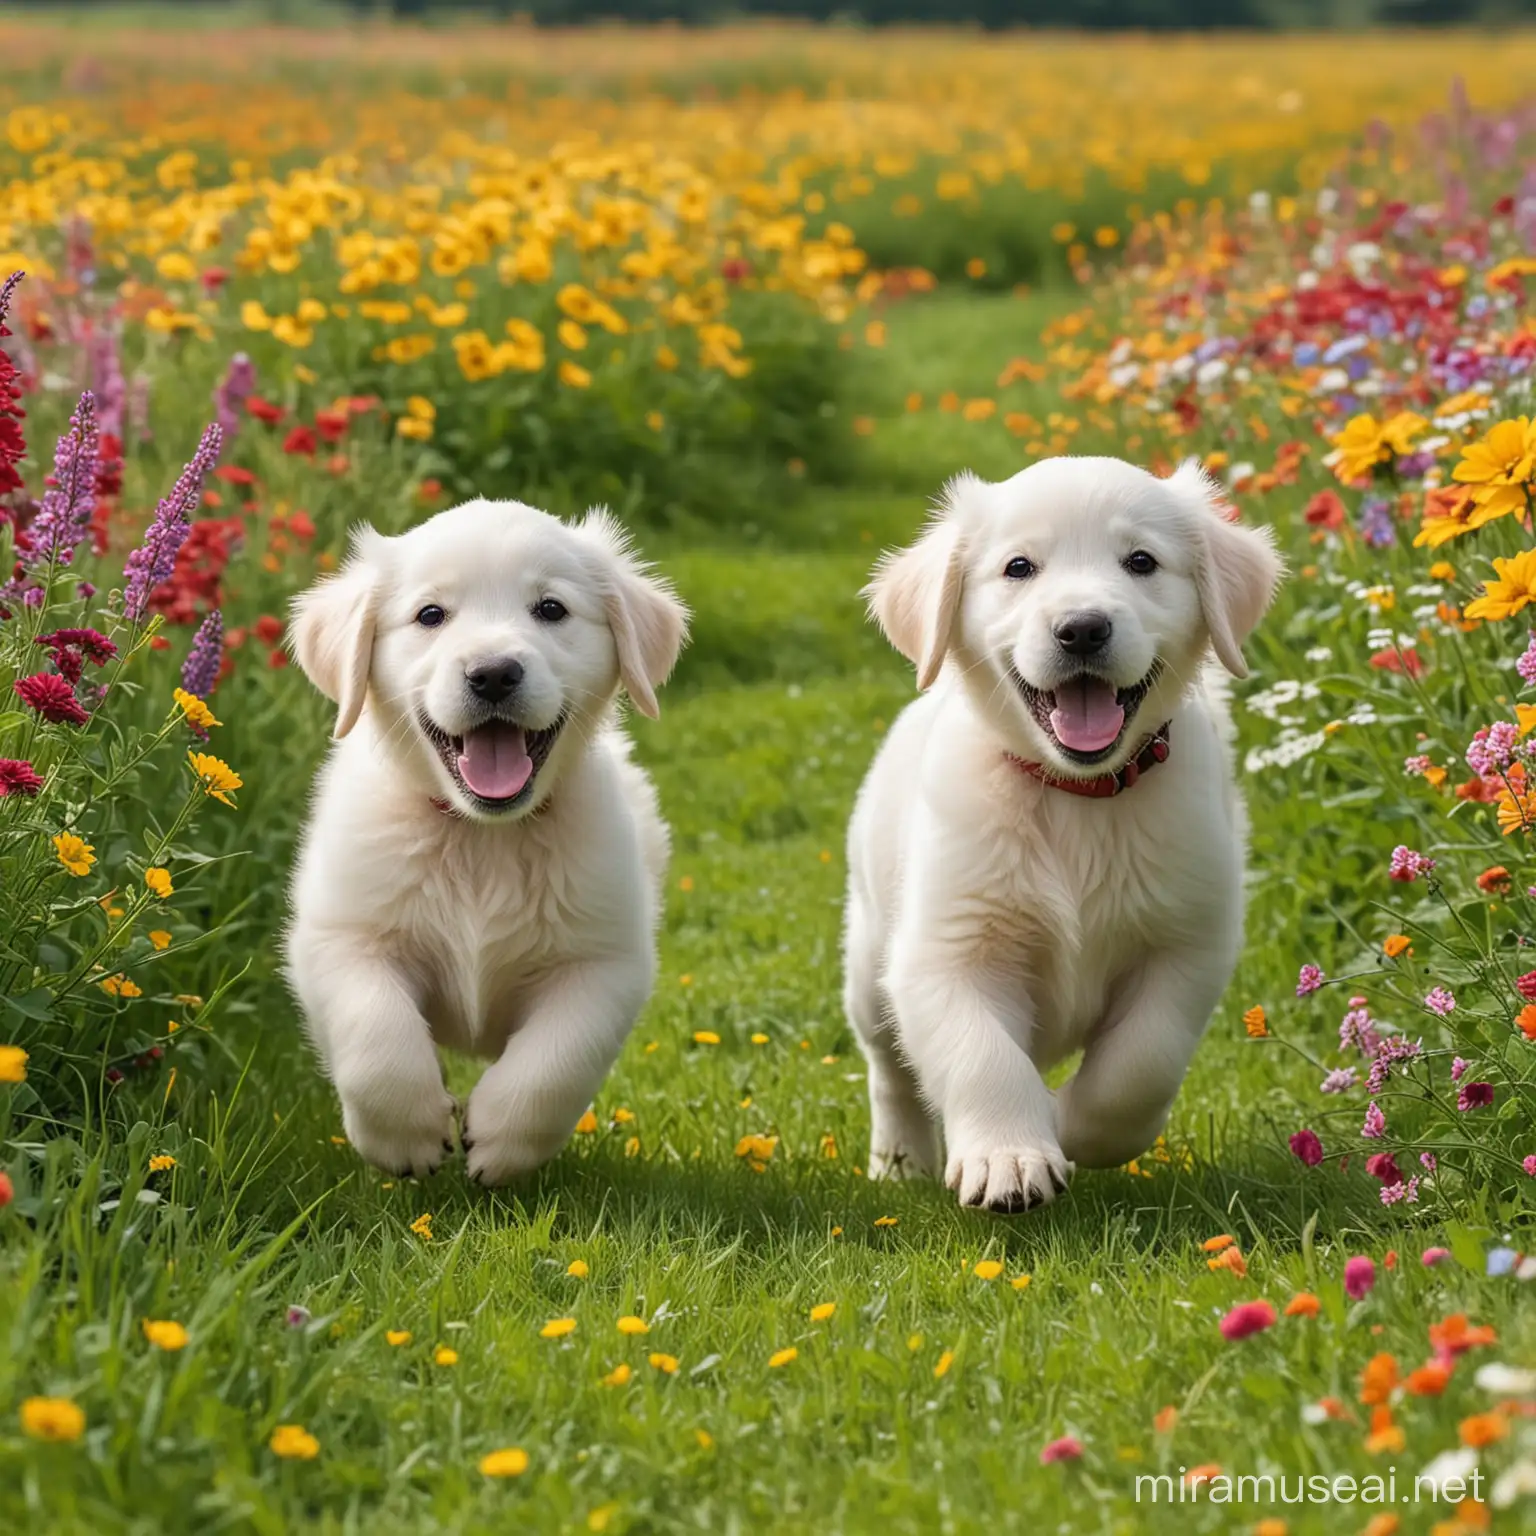 White Golden Retriever Puppies Playing in Colorful Flower Meadow